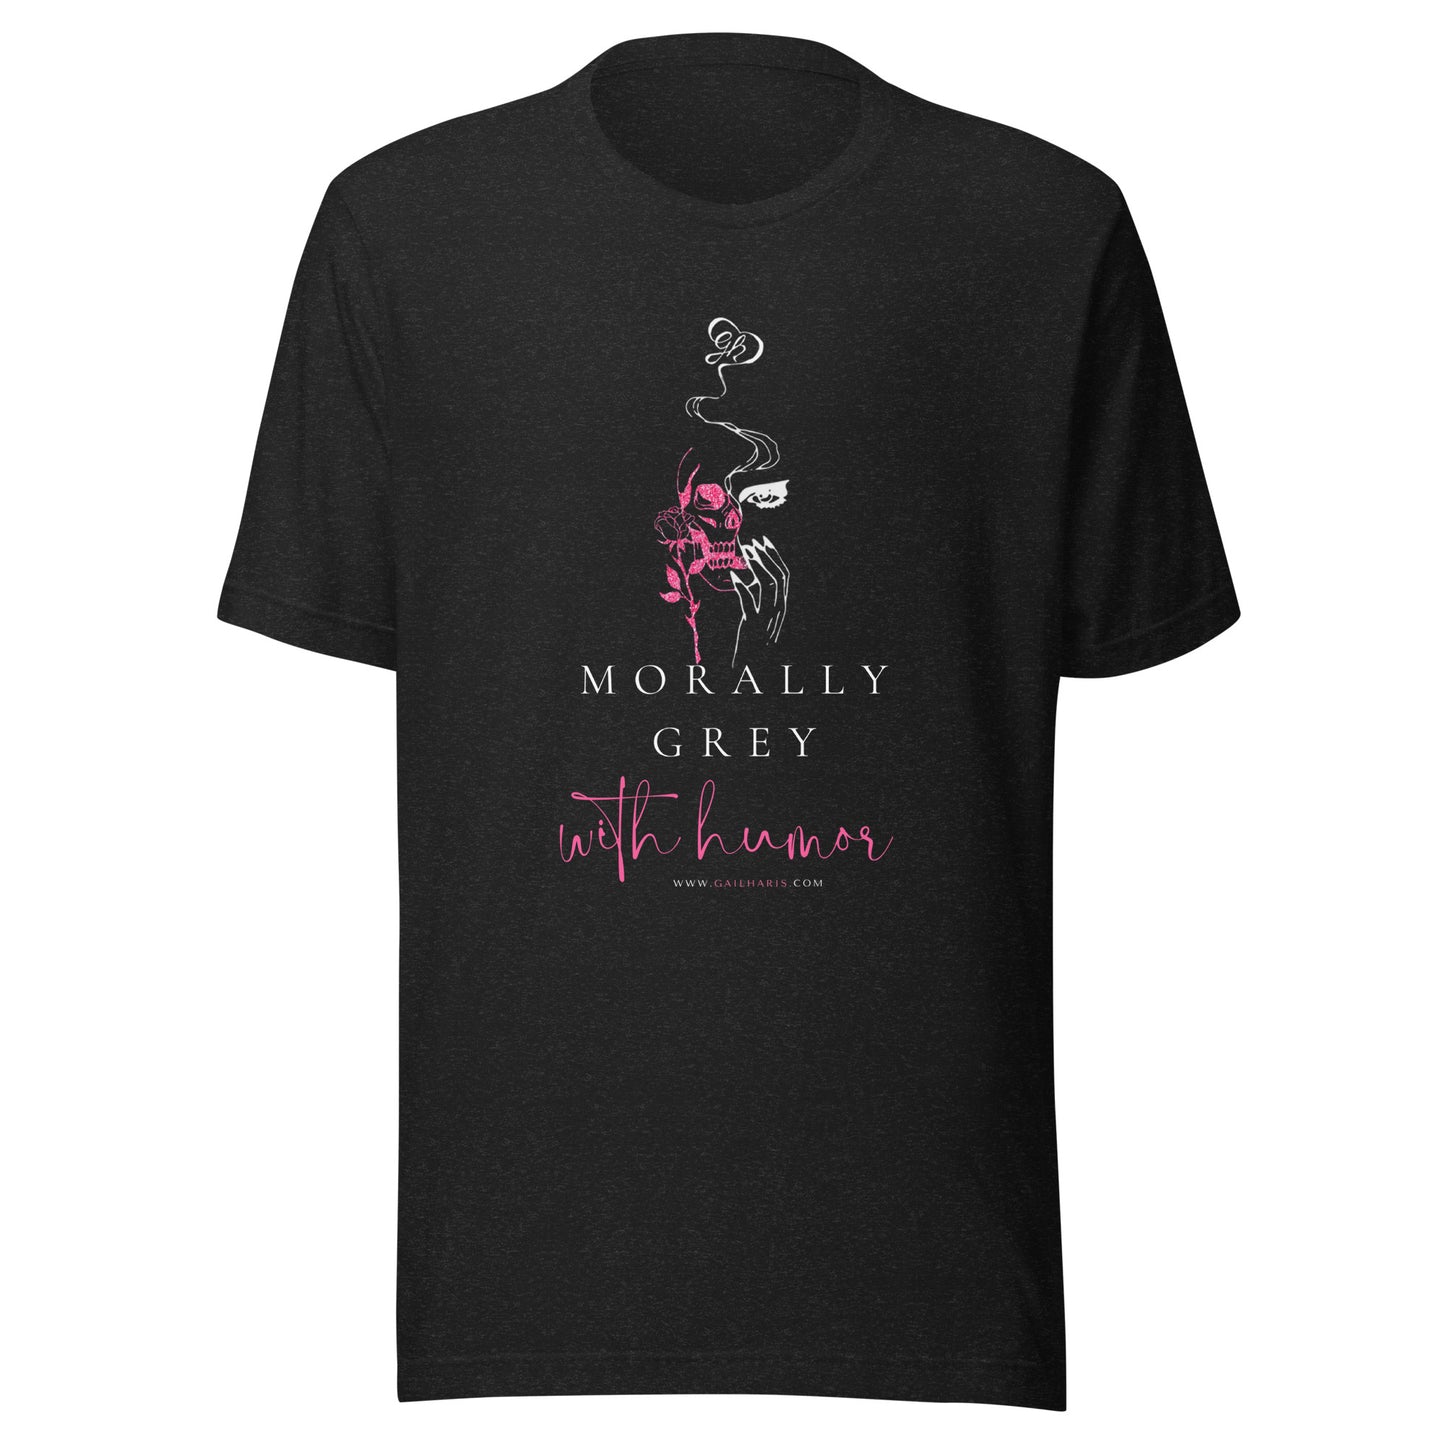 Morally Grey with Humor Unisex t-shirt